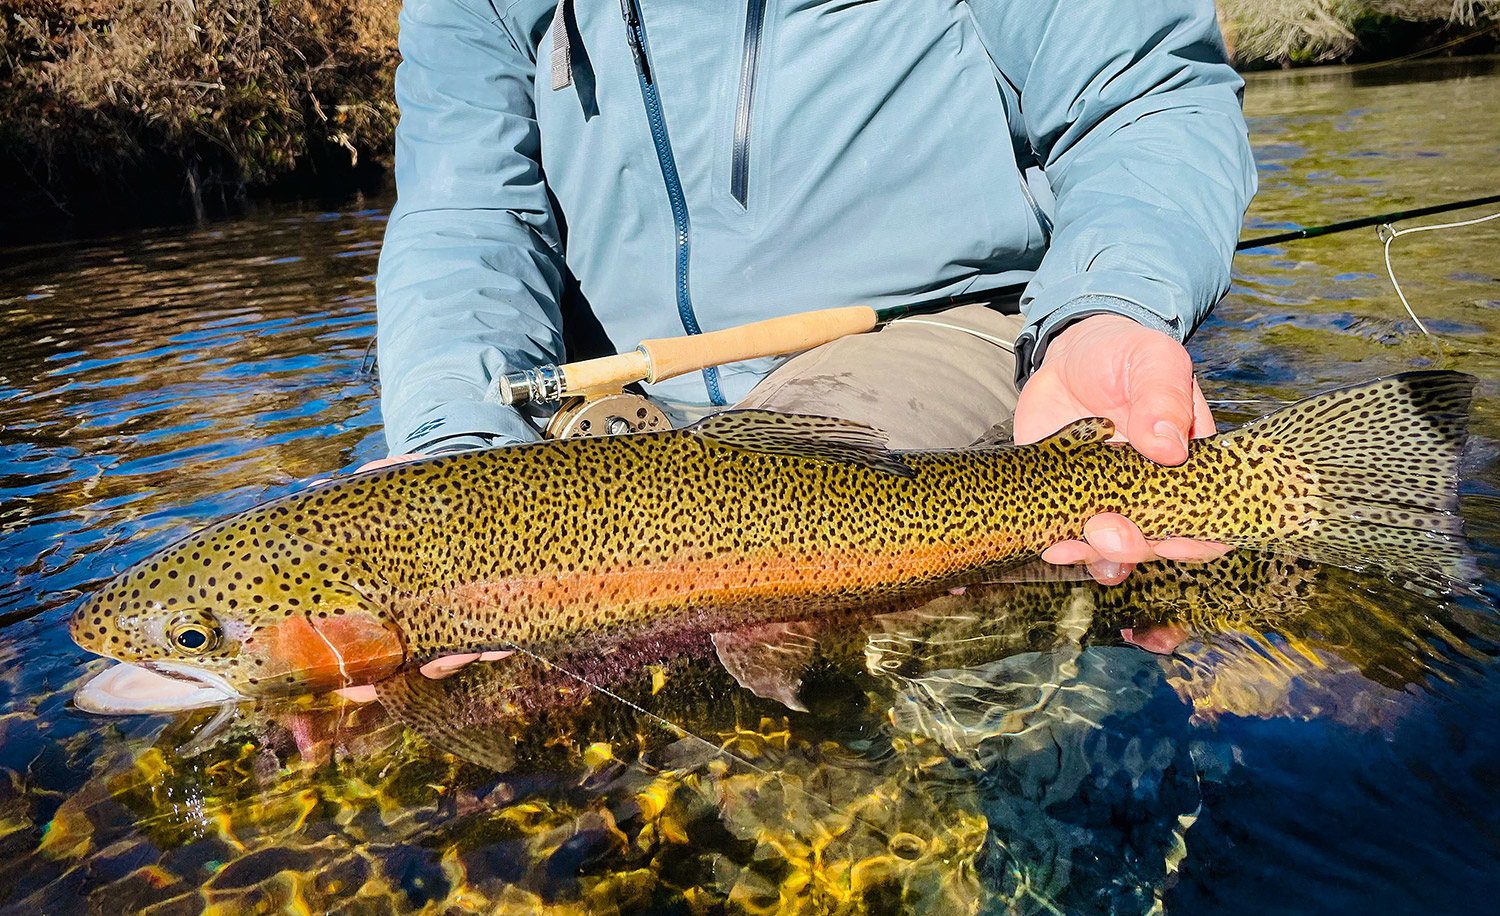 Winston Air 2 “Dark Horse” Review - Fly Fishing